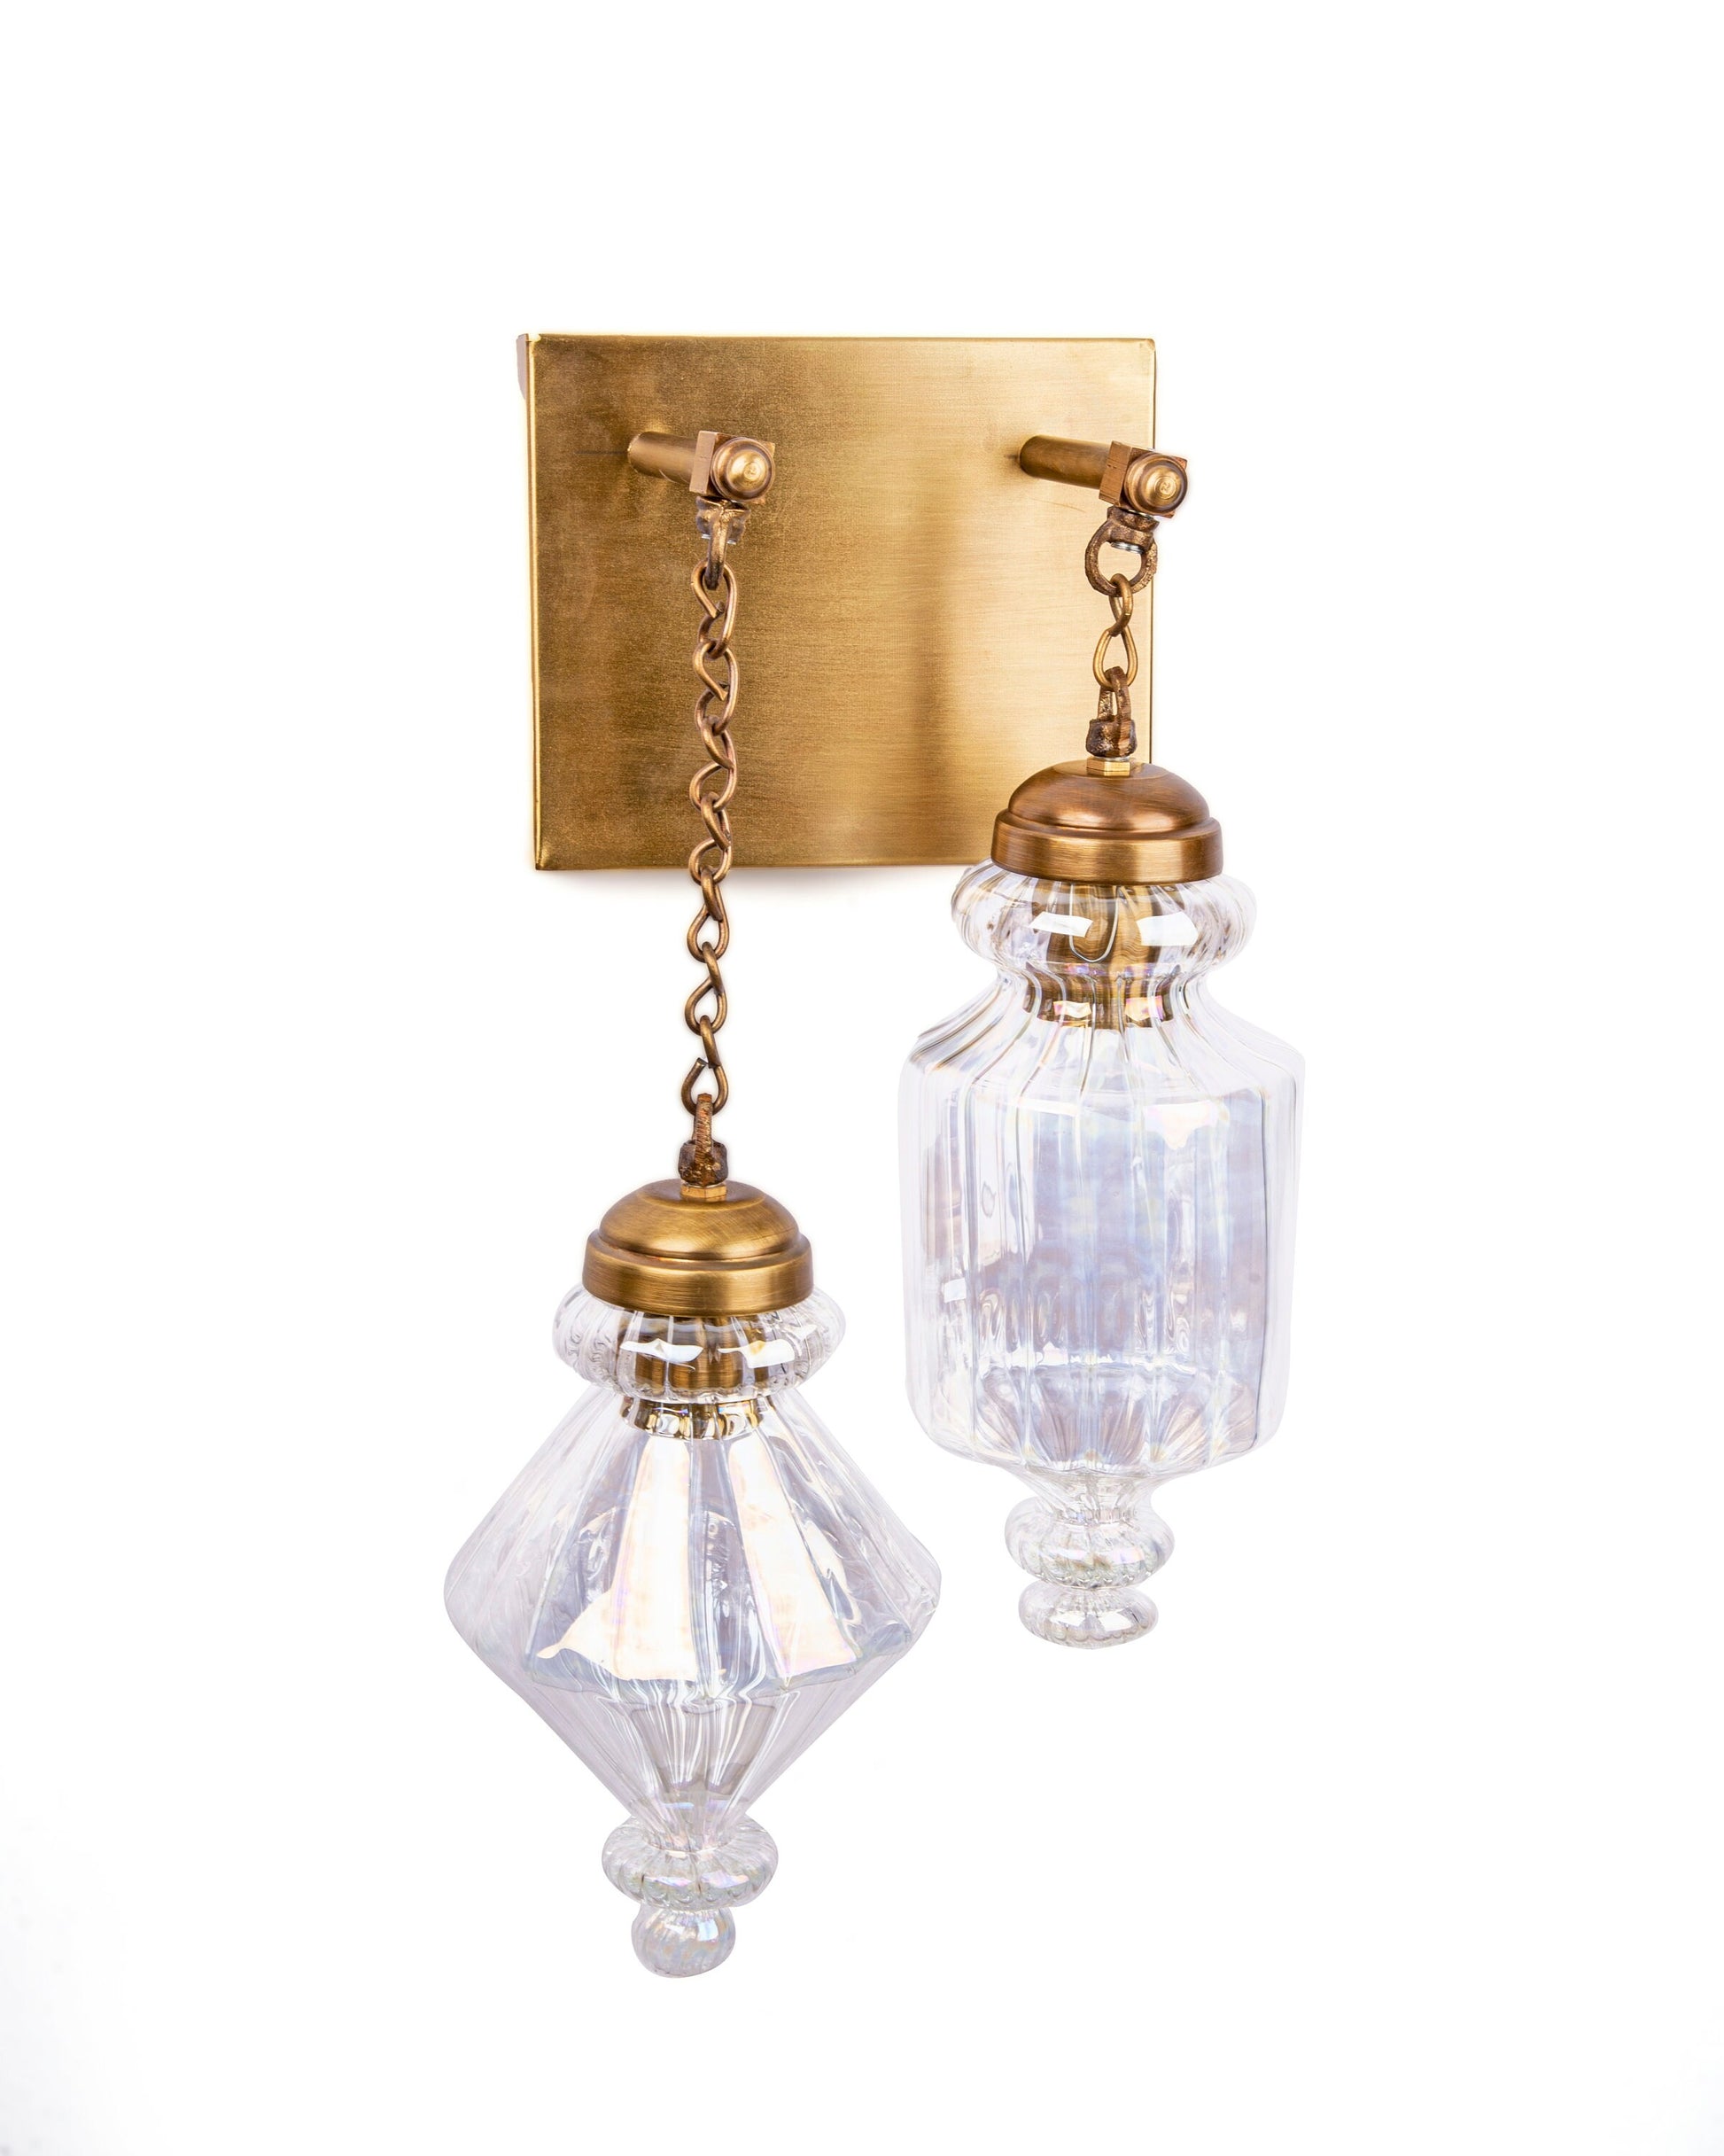 Ribbed Double Glass Sconce Light Fixture for Home Decor - Les Trois Pyramides 